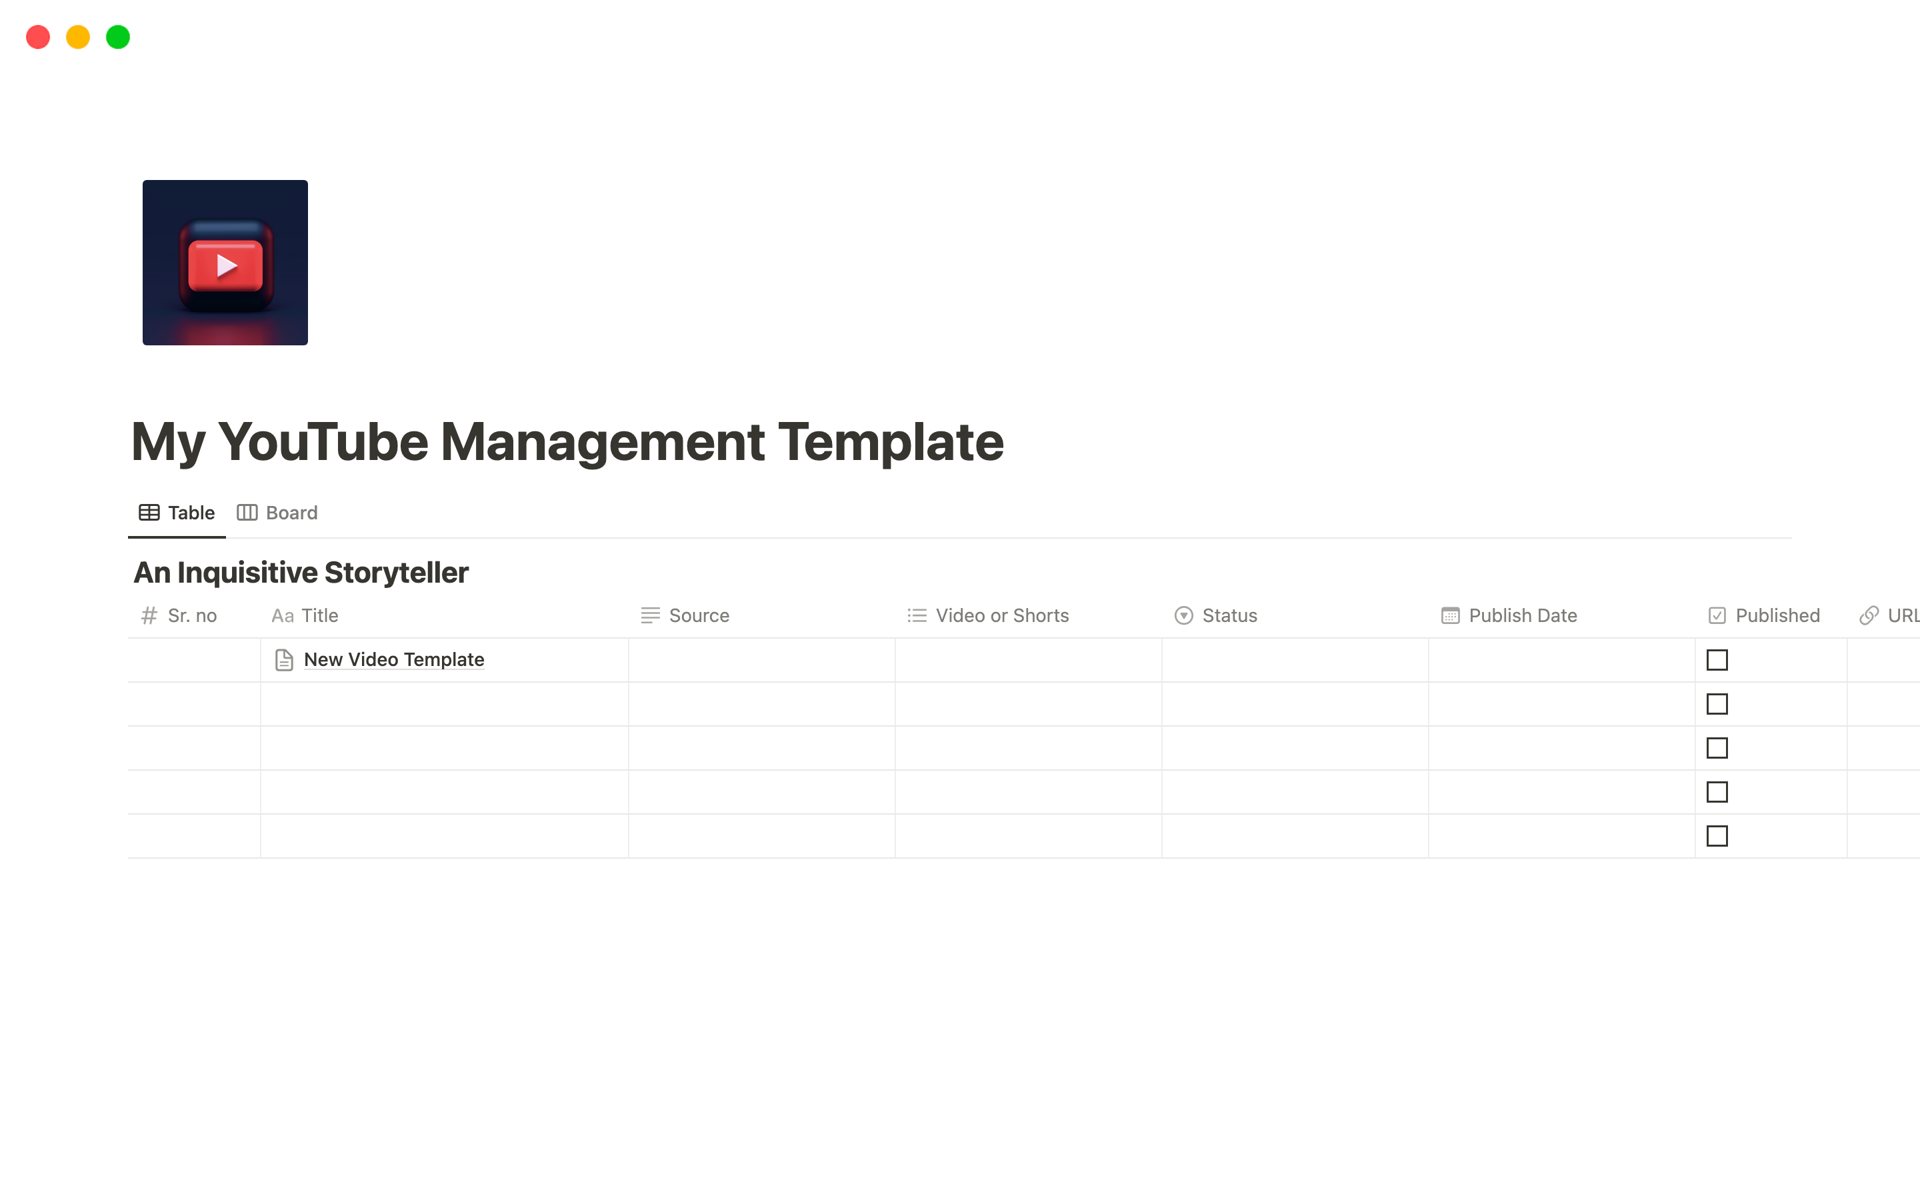 Managing video content is challenging, especially with numerous videos and multiple projects. The template aims to simplify and organize this process using Notion, a popular productivity tool for creating databases and task lists.